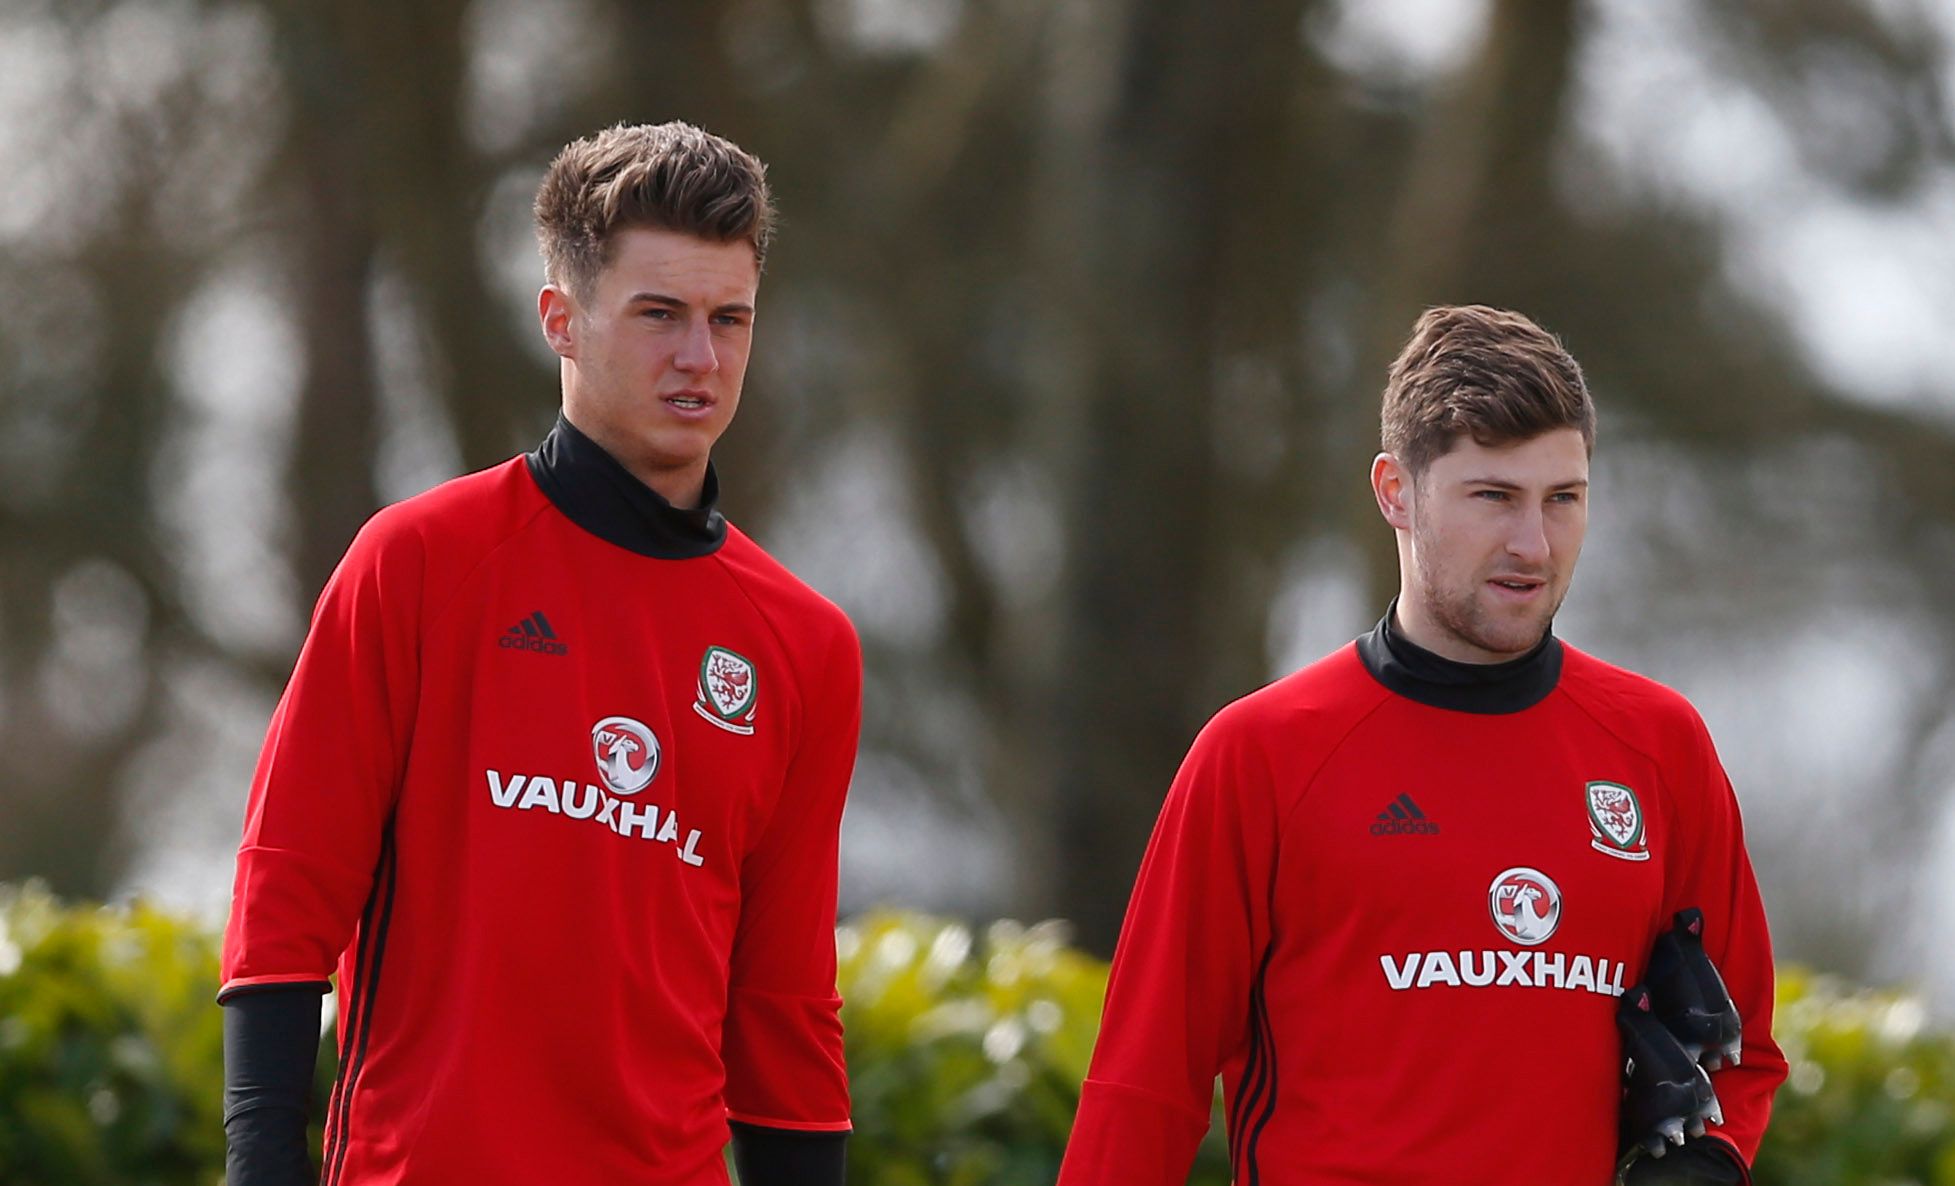 Britain Football Soccer - Wales Training - The Vale Resort, Hensol, Wales - 21/3/17 Wales' Ben Davies and Harry Wilson during training Action Images via Reuters / Matthew Childs Livepic EDITORIAL USE ONLY.